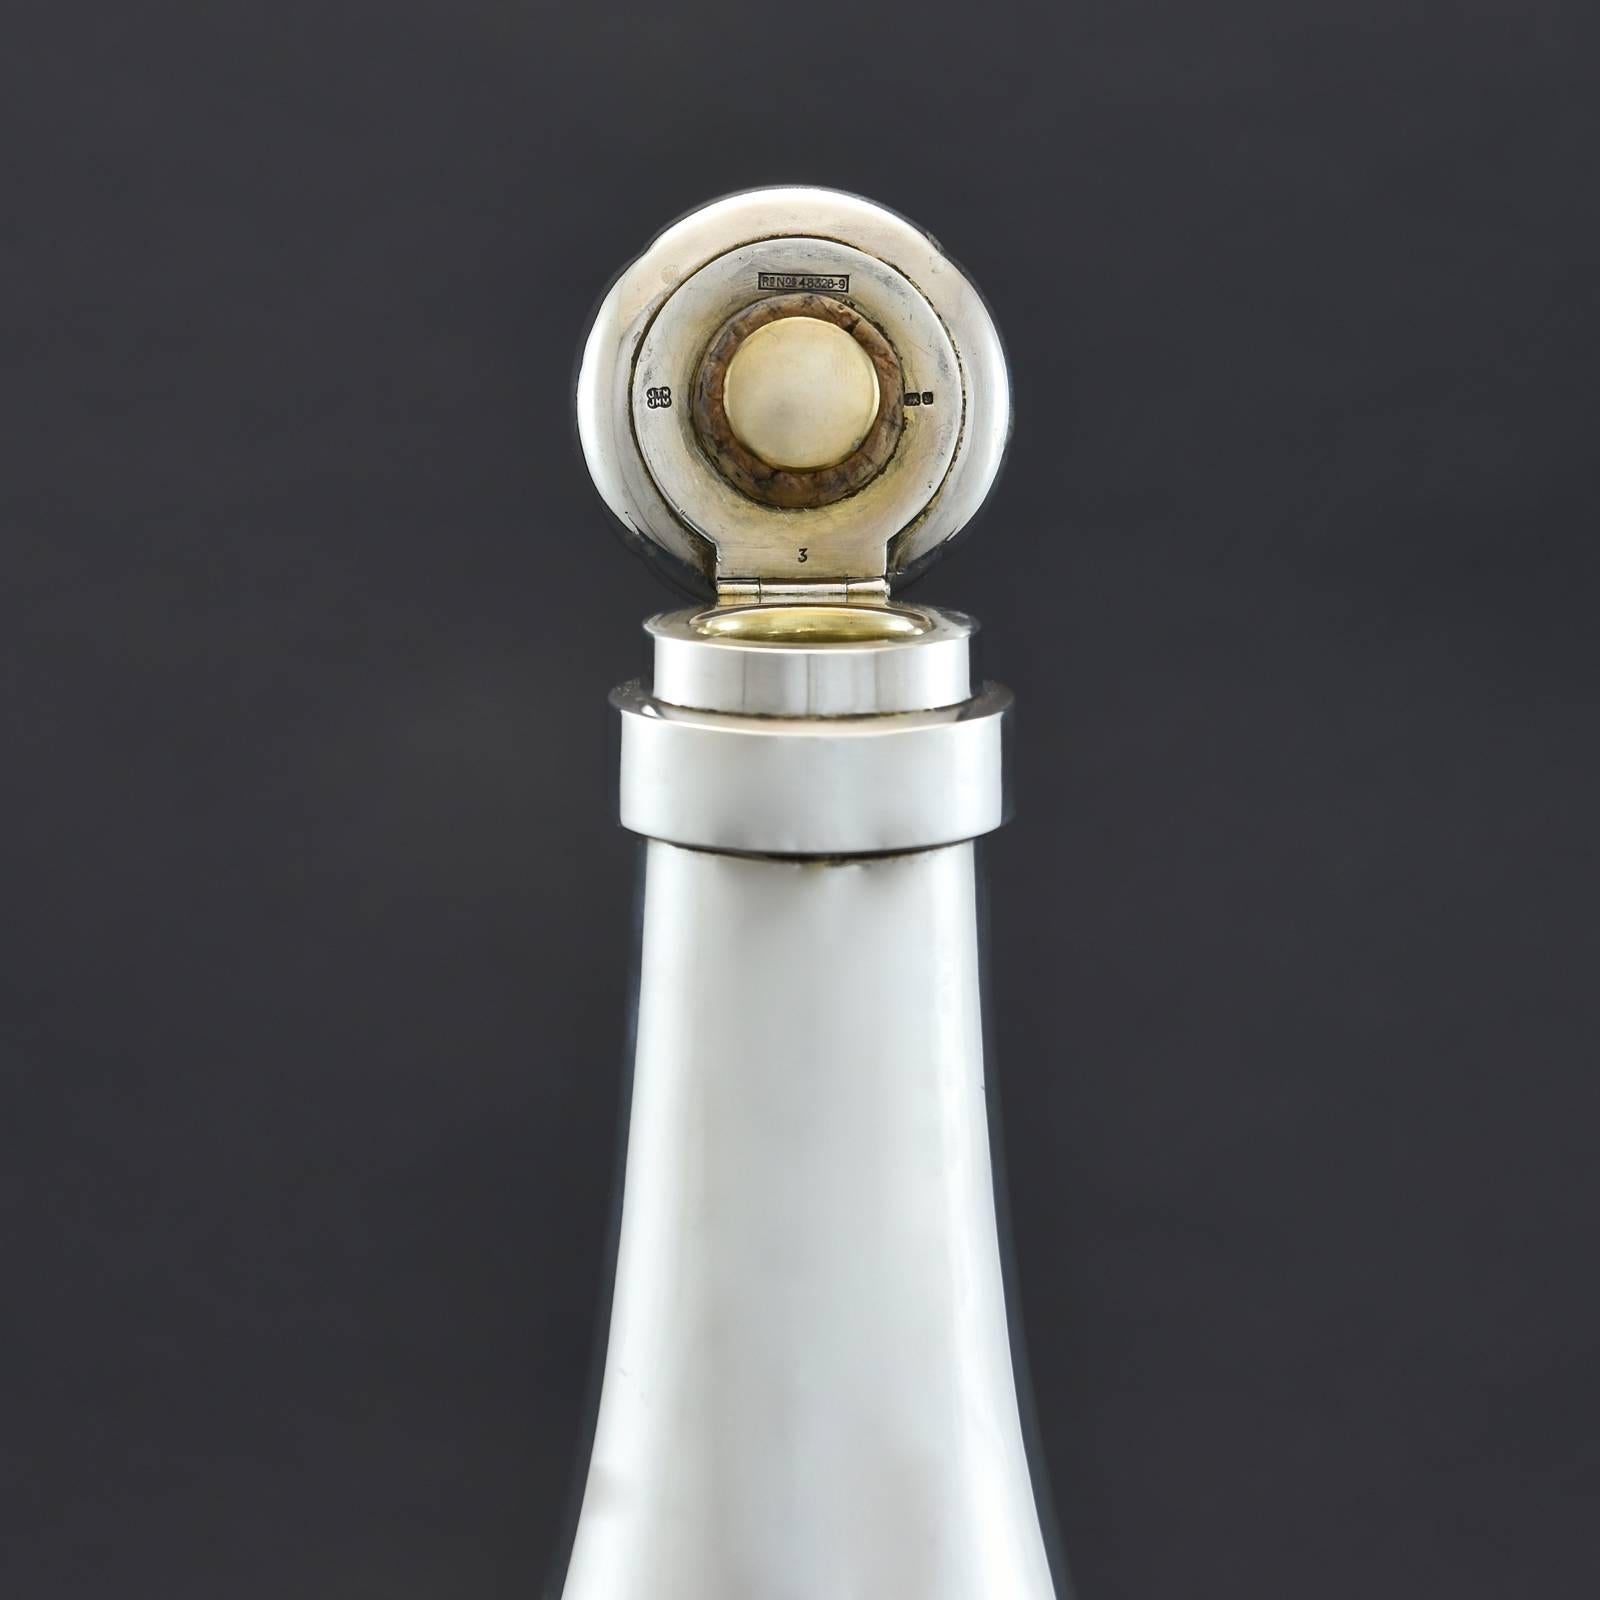 British Giant Champagne Bottle Decanter with Sterling Silver Top, Hallmarked, 1892 For Sale